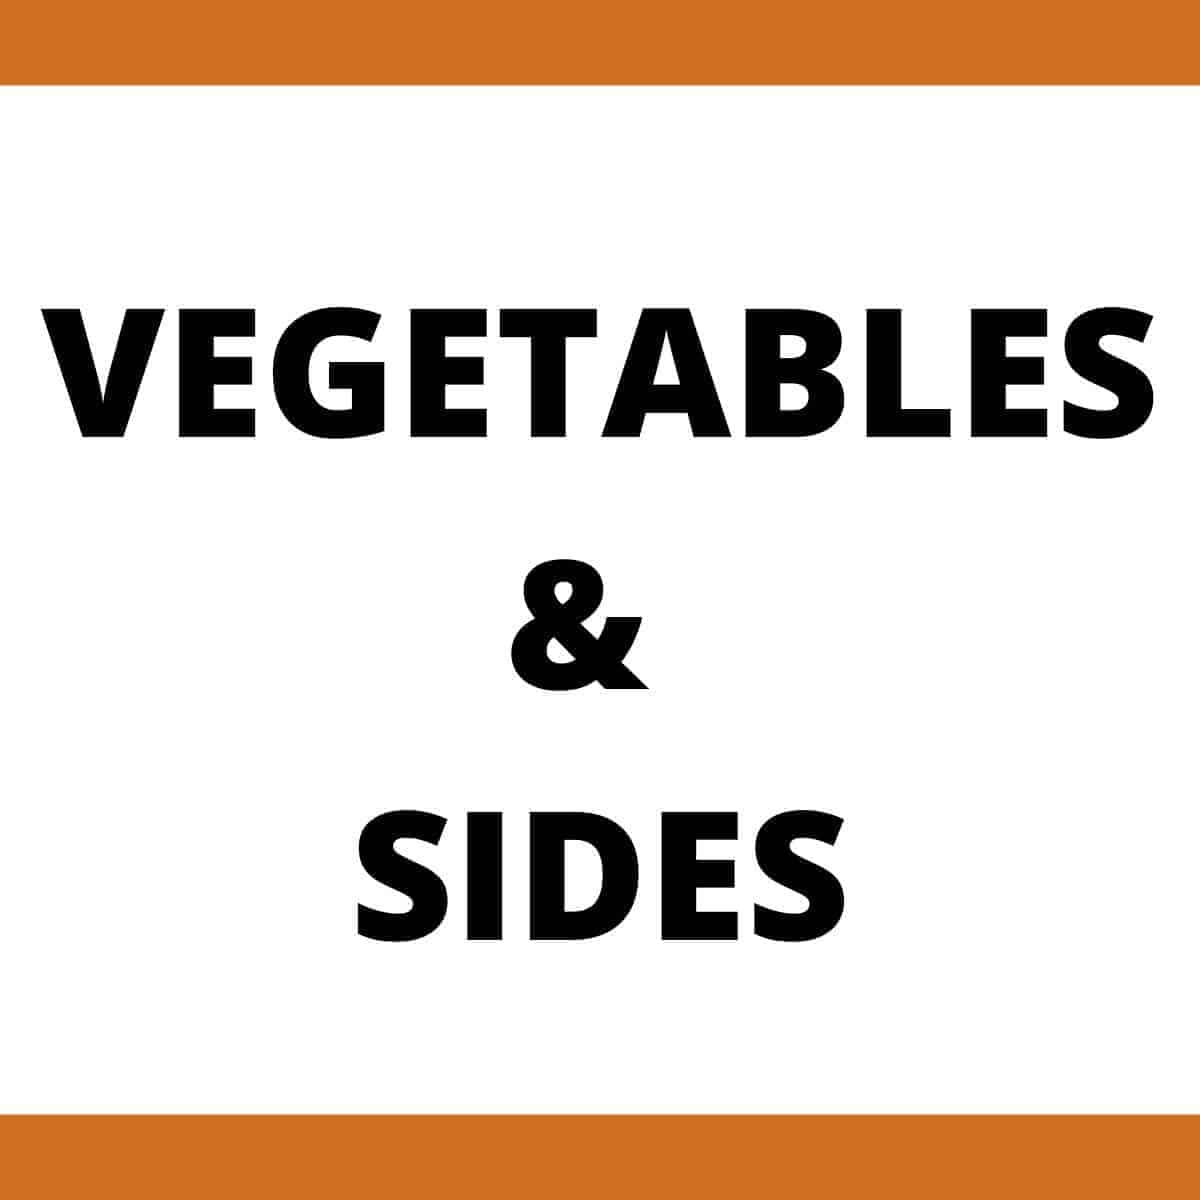 Vegetables and Sides